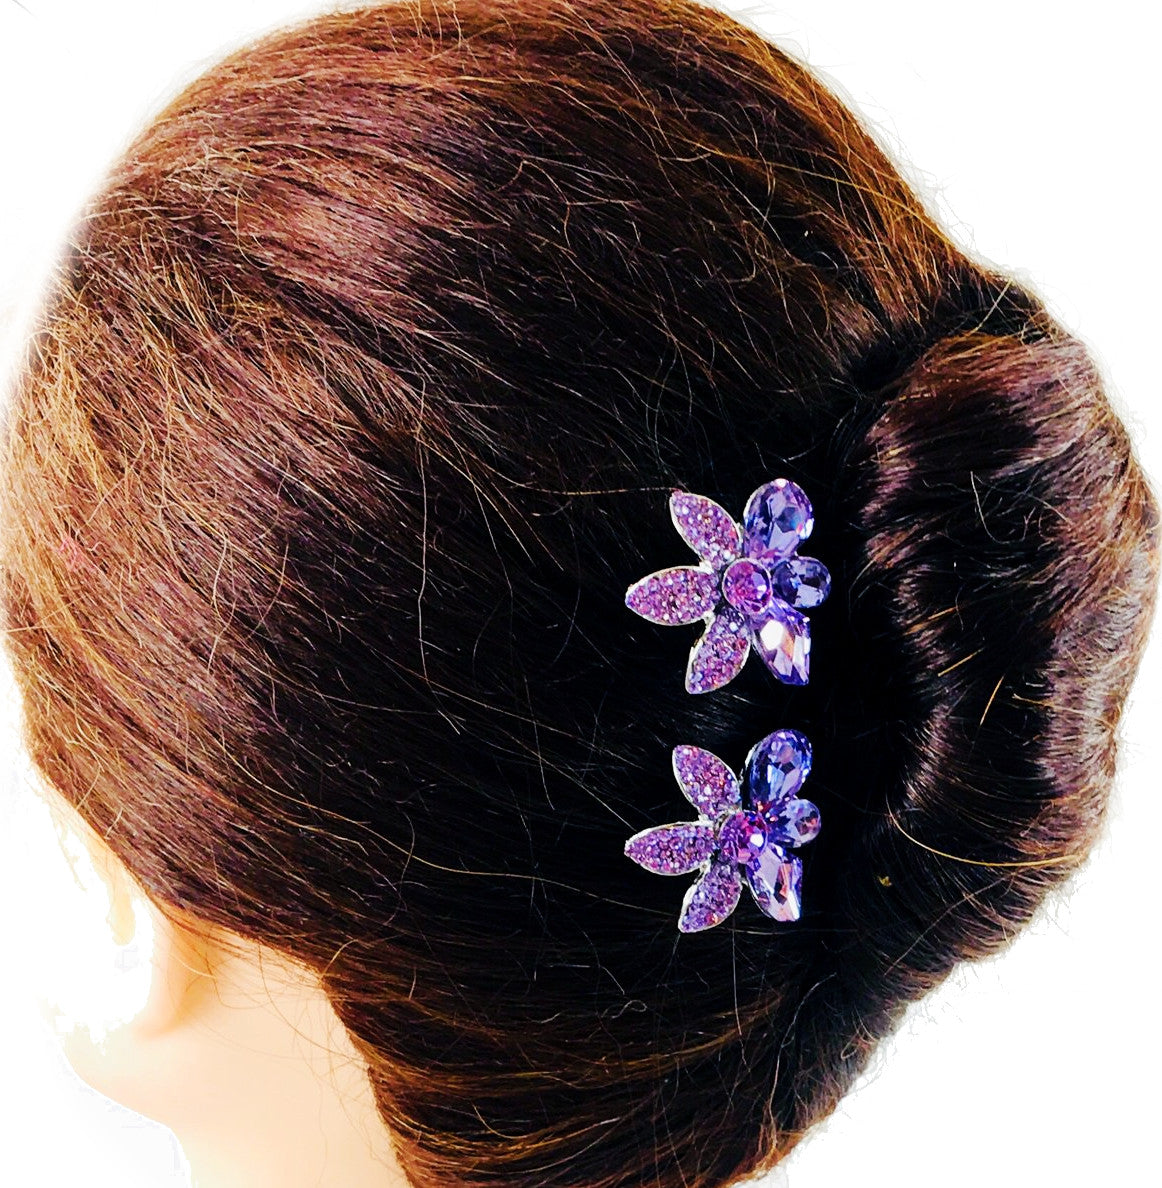 Windflower Flower Small Hair Comb made with  Swarovski  Elements Crystal Wedding Bridal Prom Party, Hair Comb - MOGHANT